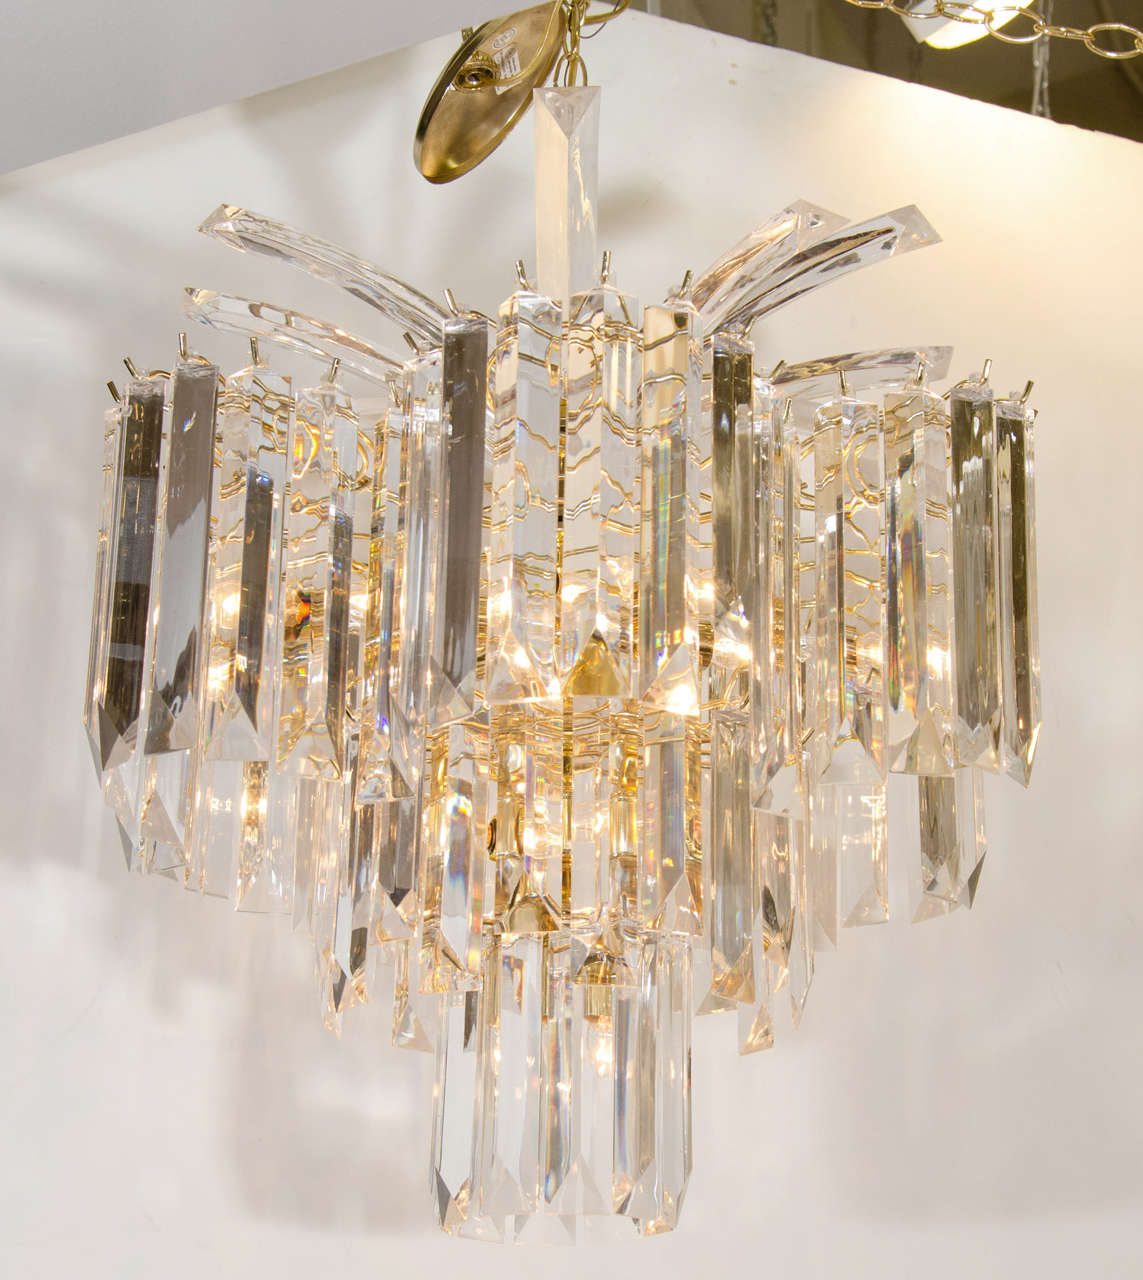 A vintage brass frame chandelier with suspended lucite prisms and a waterfall spray style top.

Good vintage condition with age appropriate wear.